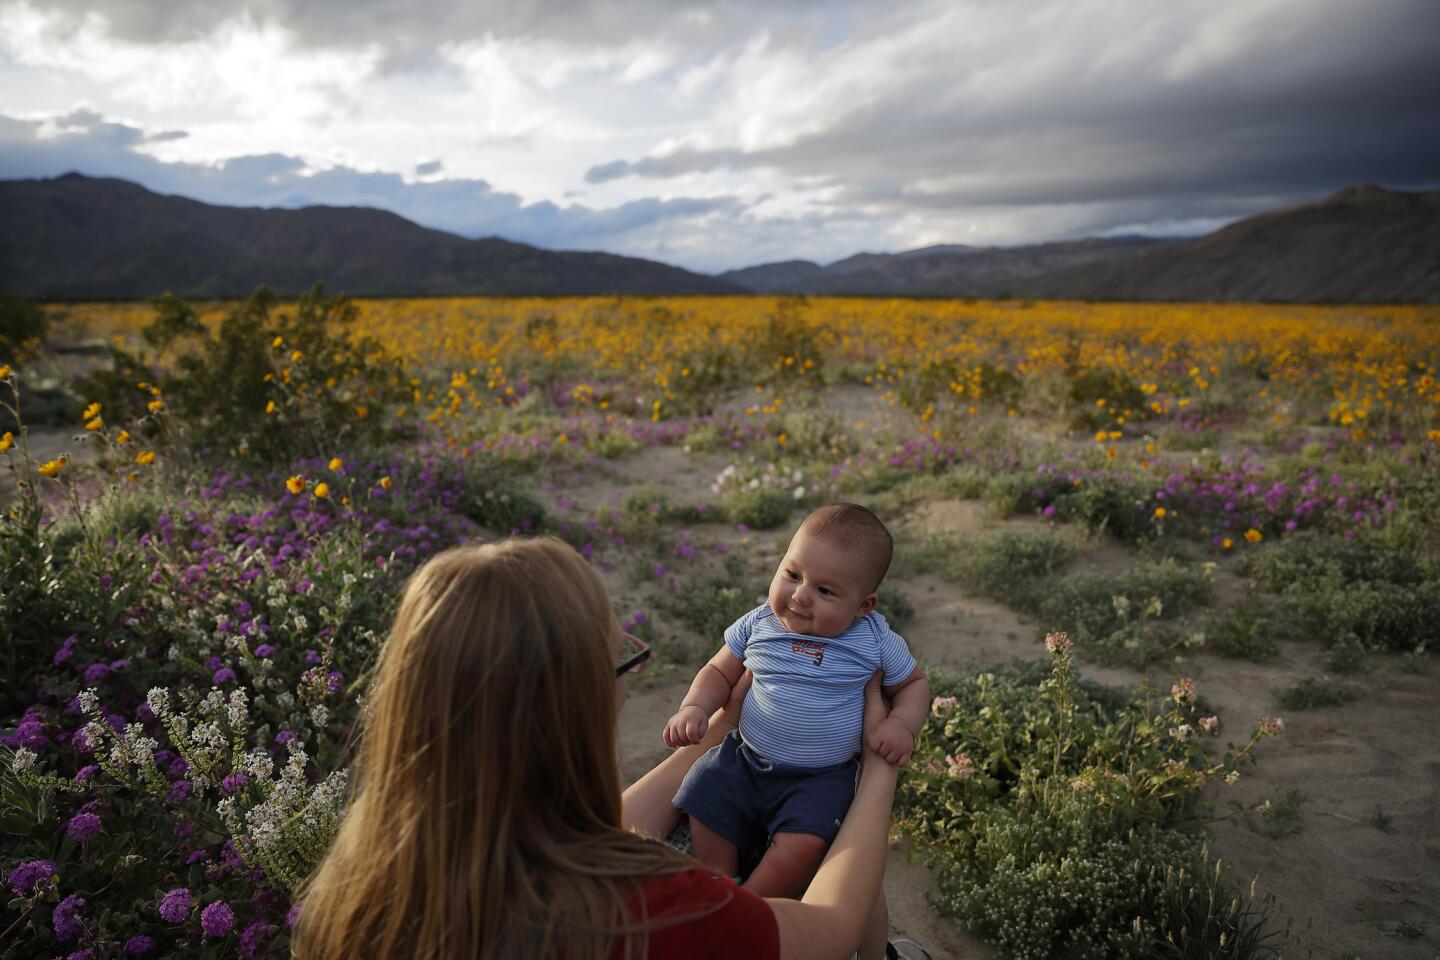 Less than a week before the start of spring 2019, Rene Garcia and her 3-month-old son, Brandon, dawdle in the Anza-Borrego.